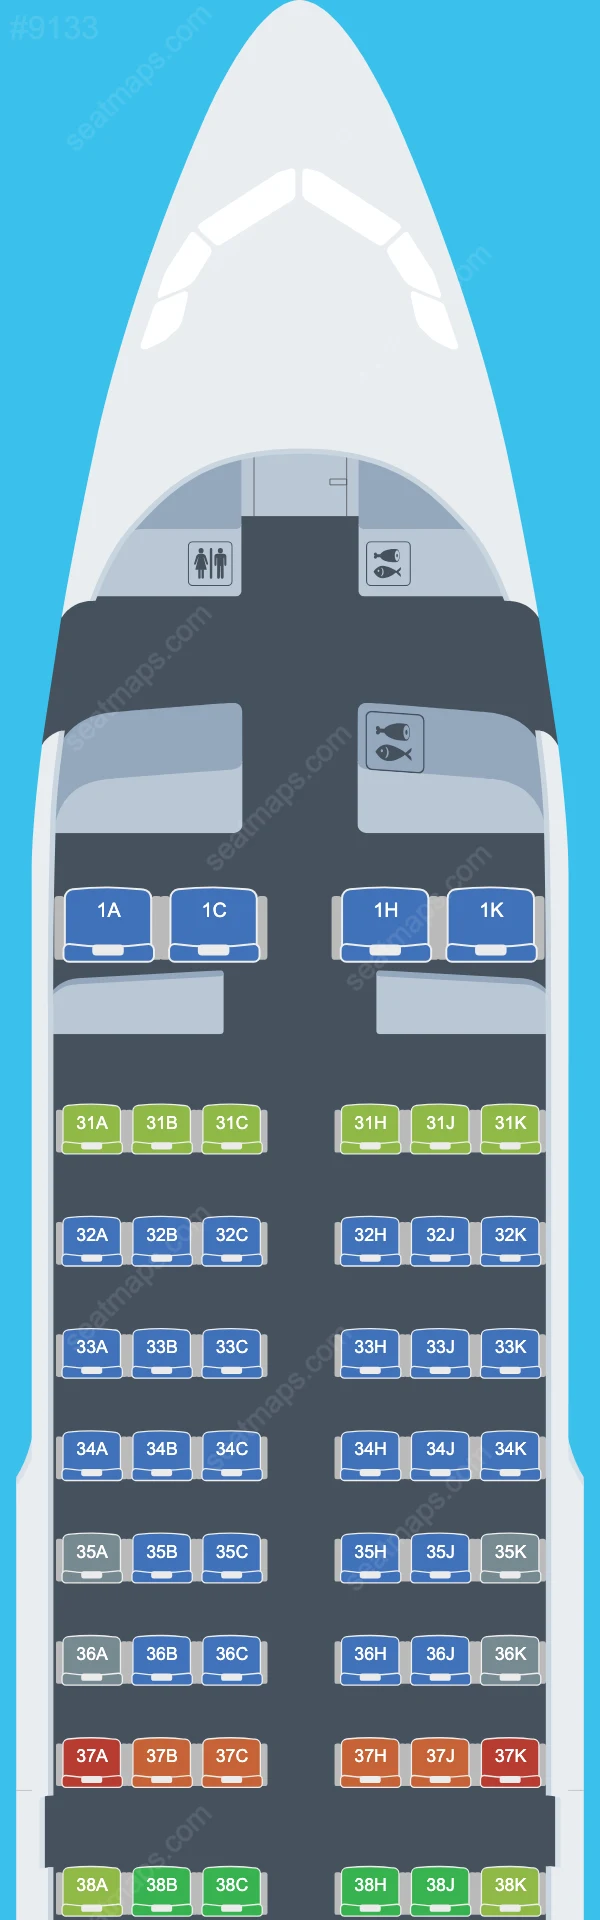 China Southern Airbus A319 Seat Maps A319-100 V.6